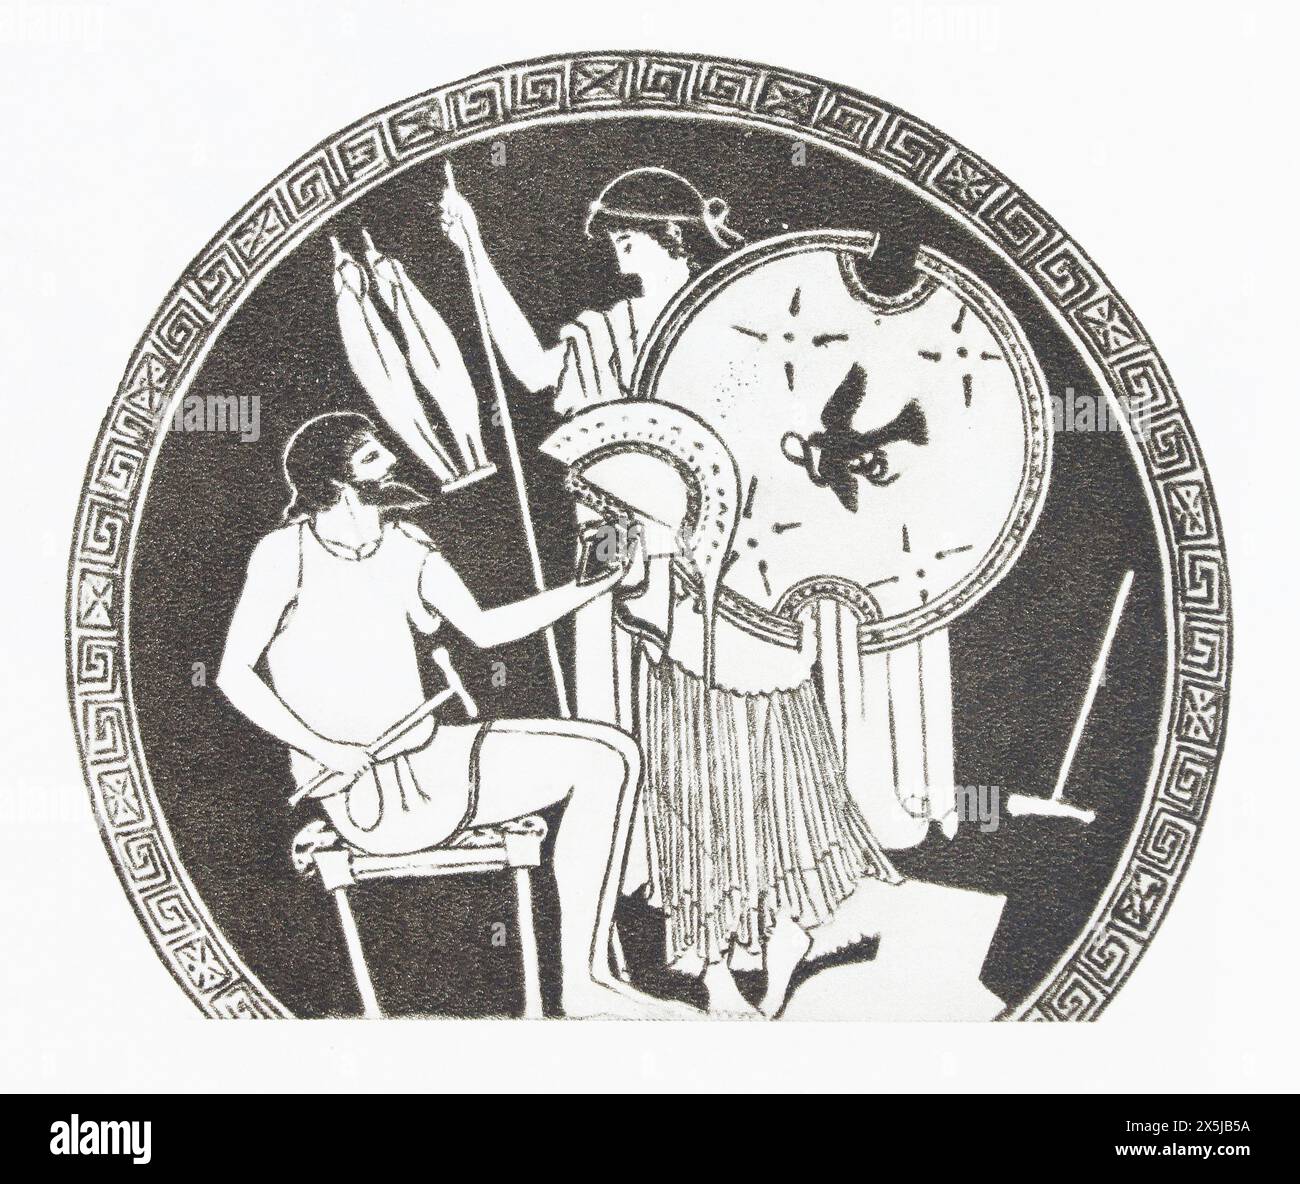 Hephaestus and Thetis. Ancient Greek painting on a vase from the 5th century BC. Stock Photo